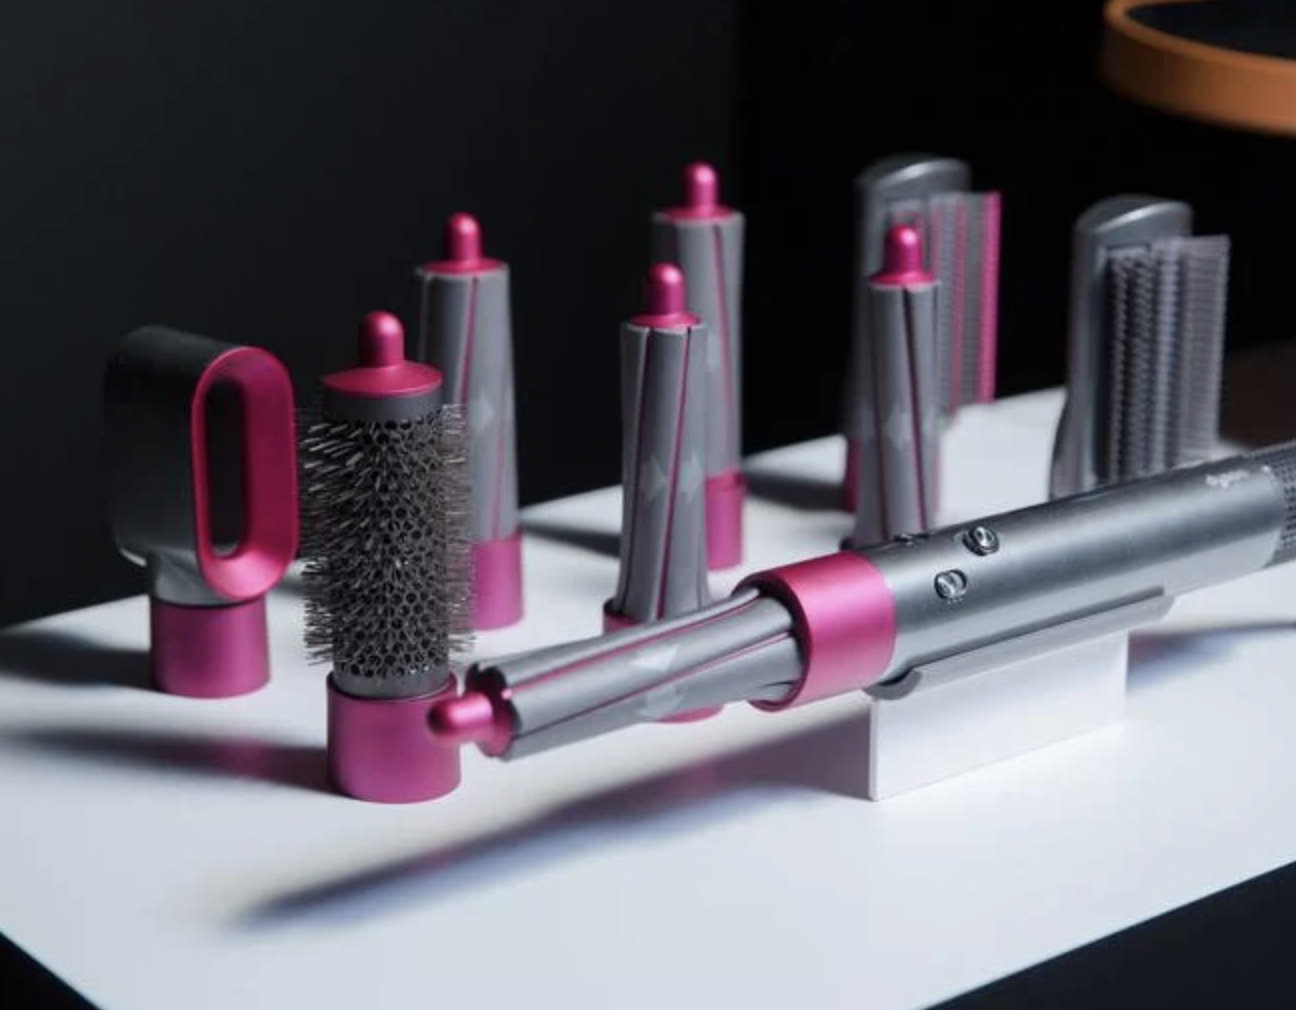 DYSON AIRWRAP STYLING TOOLS